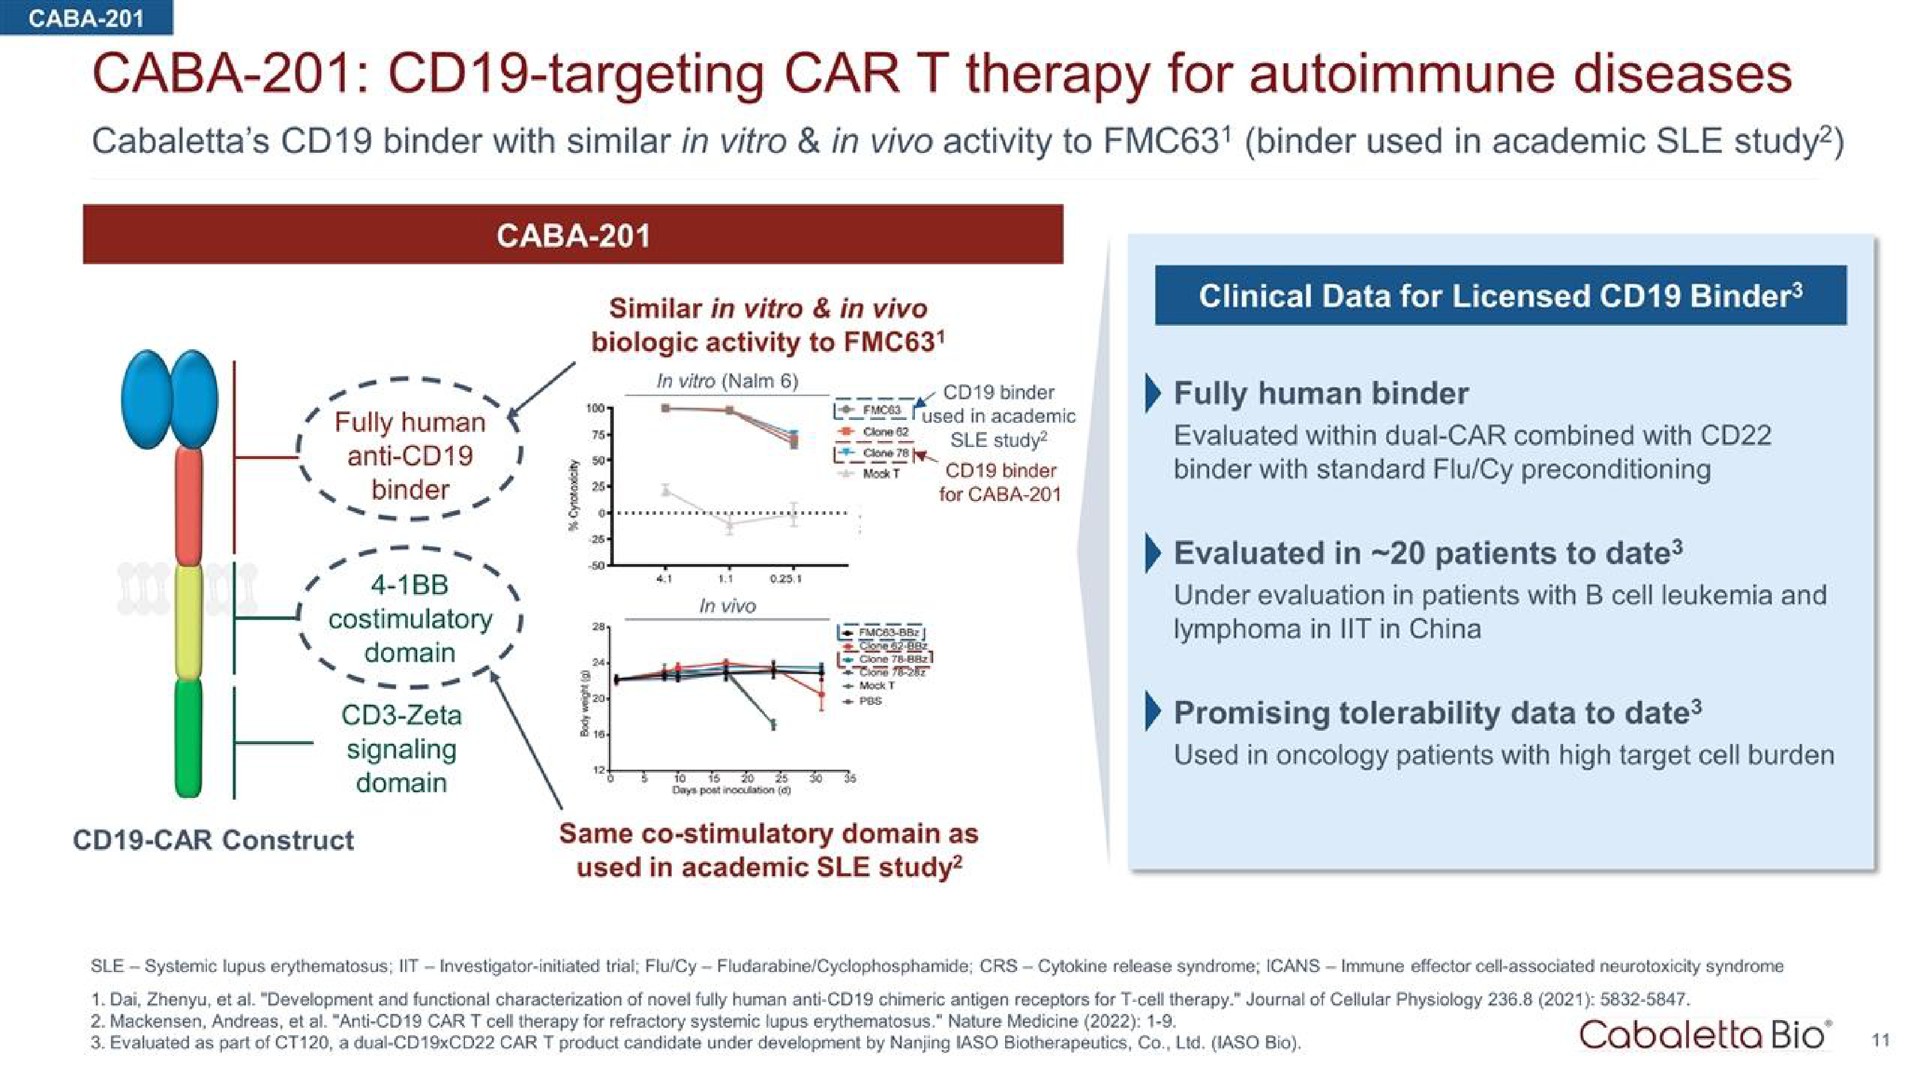 caba targeting car therapy for diseases | Cabaletta Bio